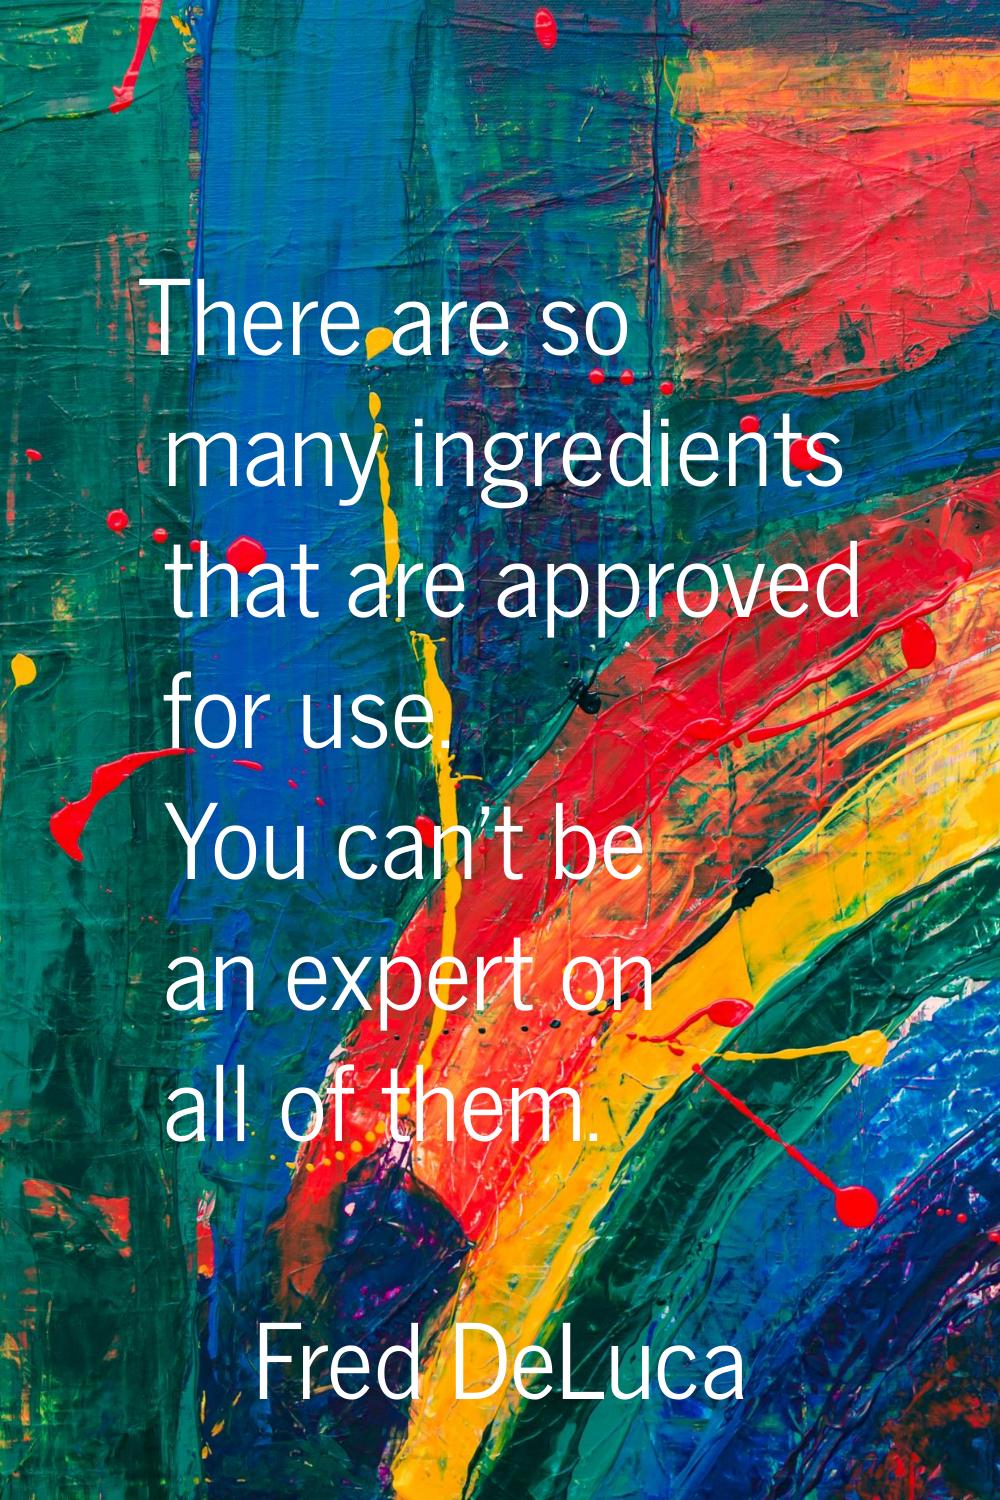 There are so many ingredients that are approved for use. You can't be an expert on all of them.